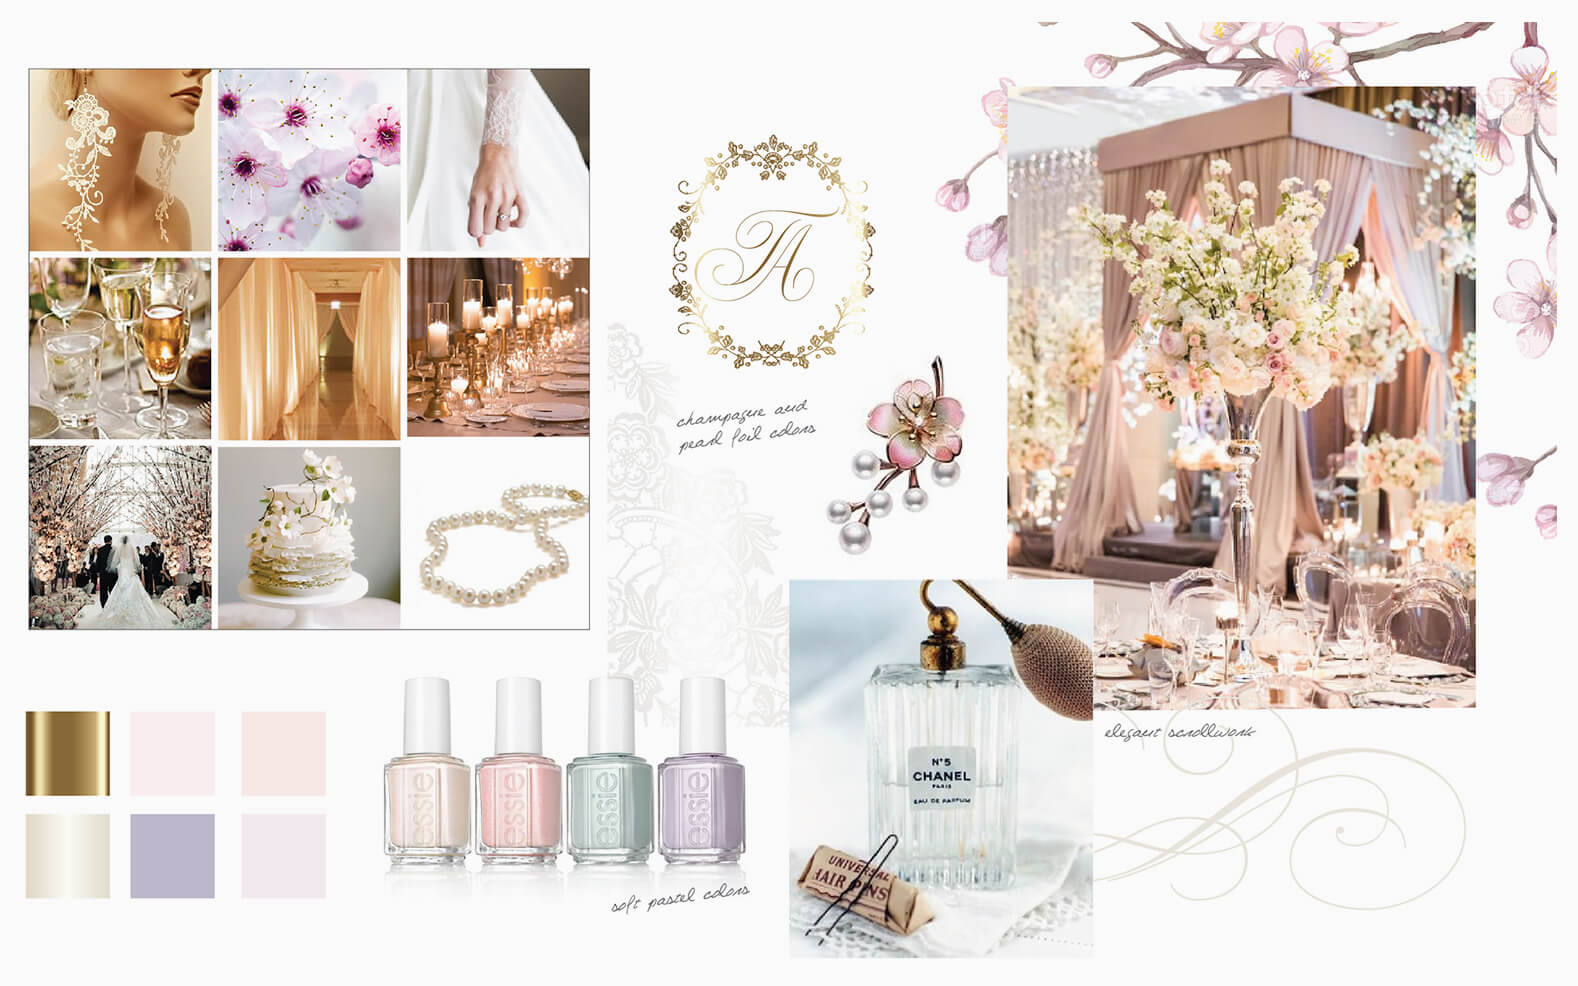 Pastel colors and cherry blossom moodboard